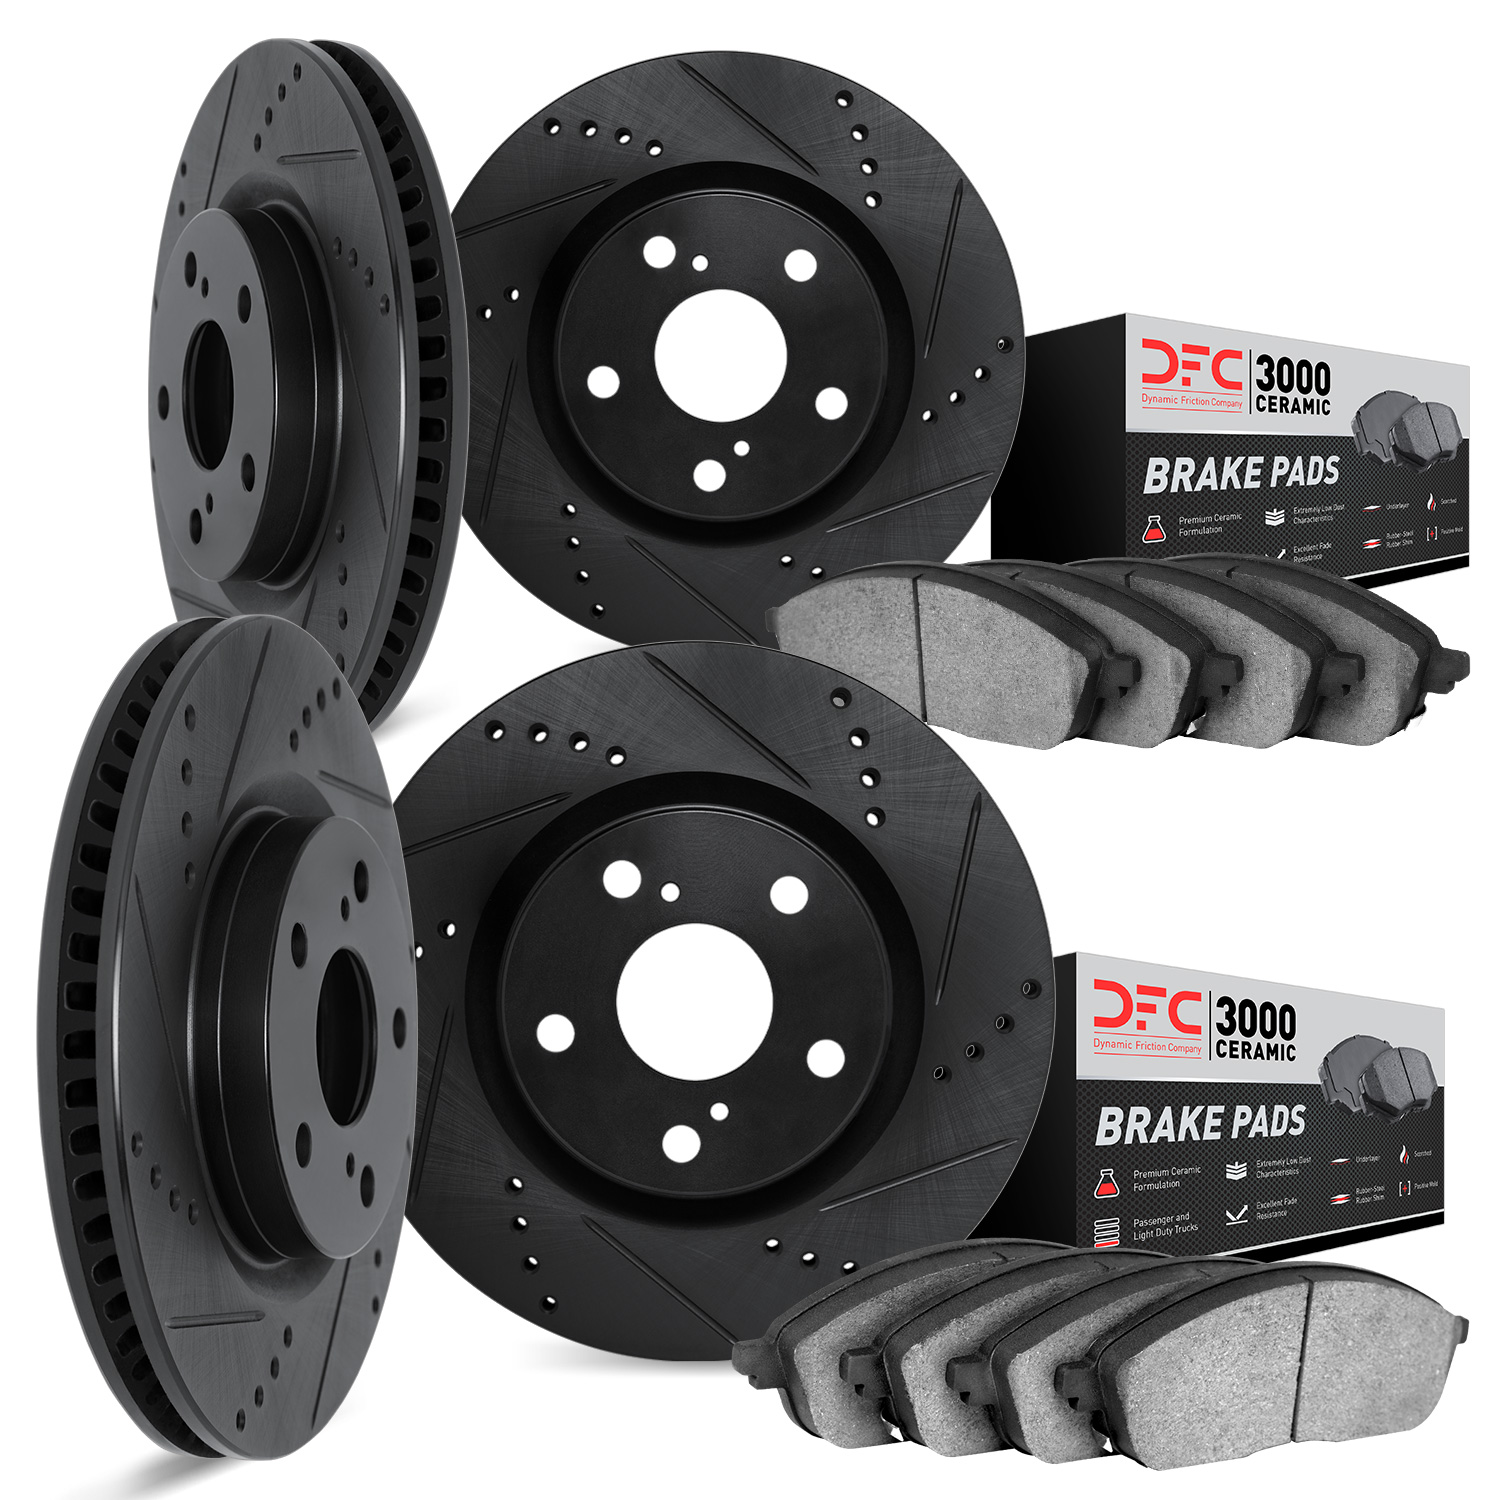 8304-31048 Drilled/Slotted Brake Rotors with 3000-Series Ceramic Brake Pads Kit [Black], 2005-2008 BMW, Position: Front and Rear